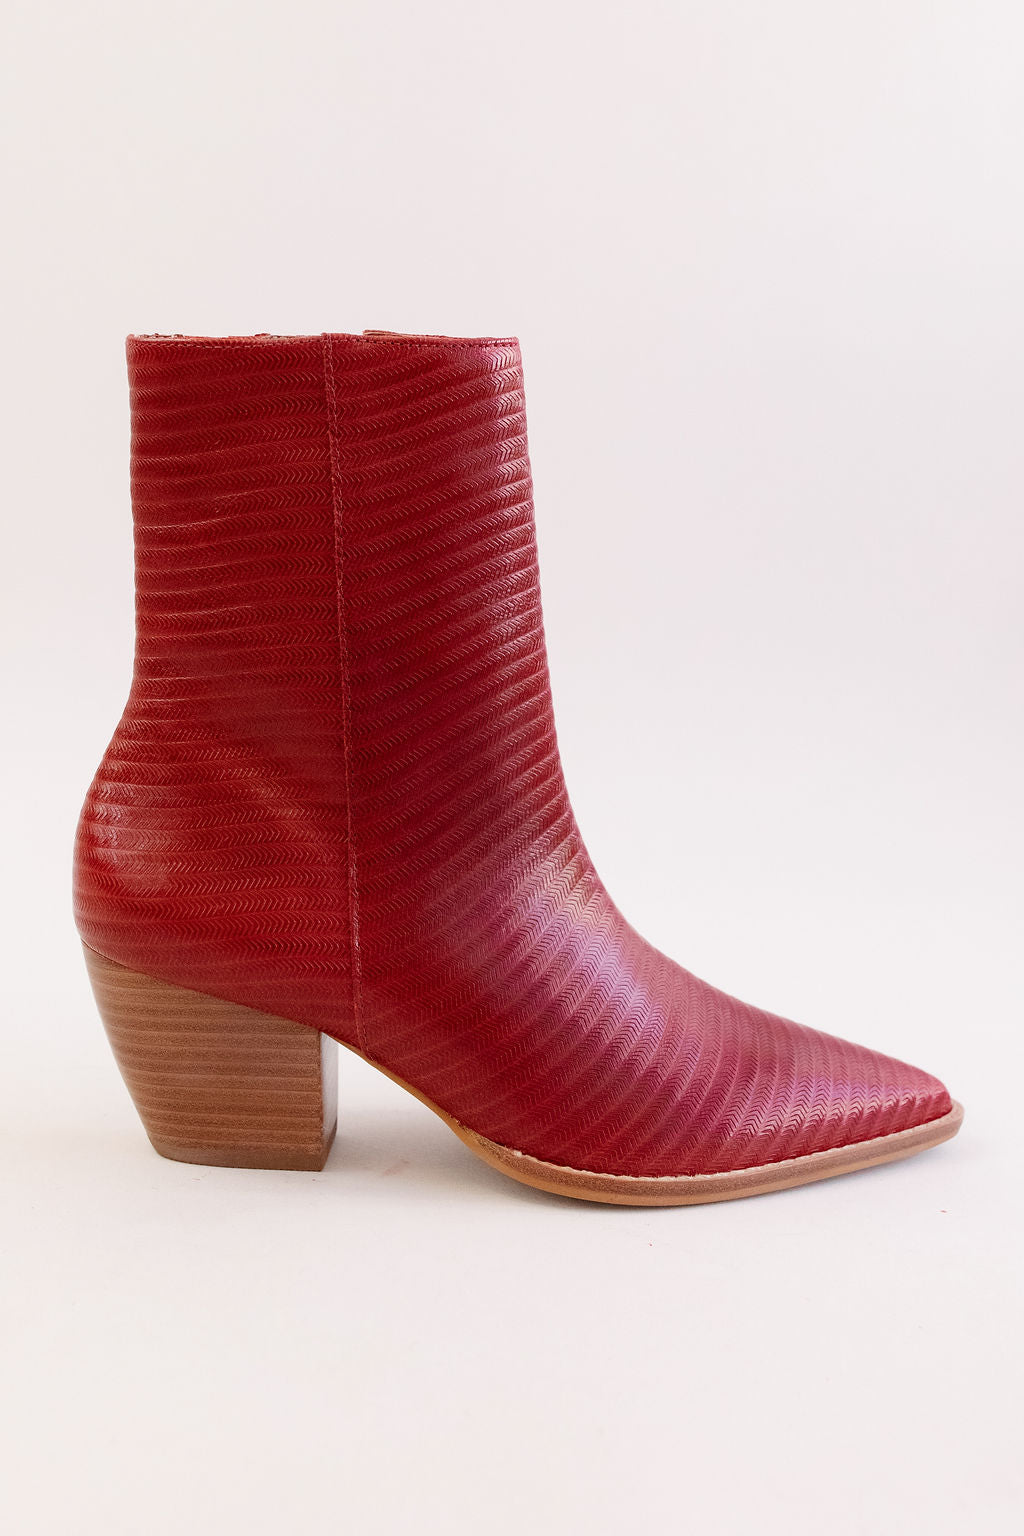 Matisse | Caty Ankle Boot | Cherry Rope Leather - Poppy and Stella